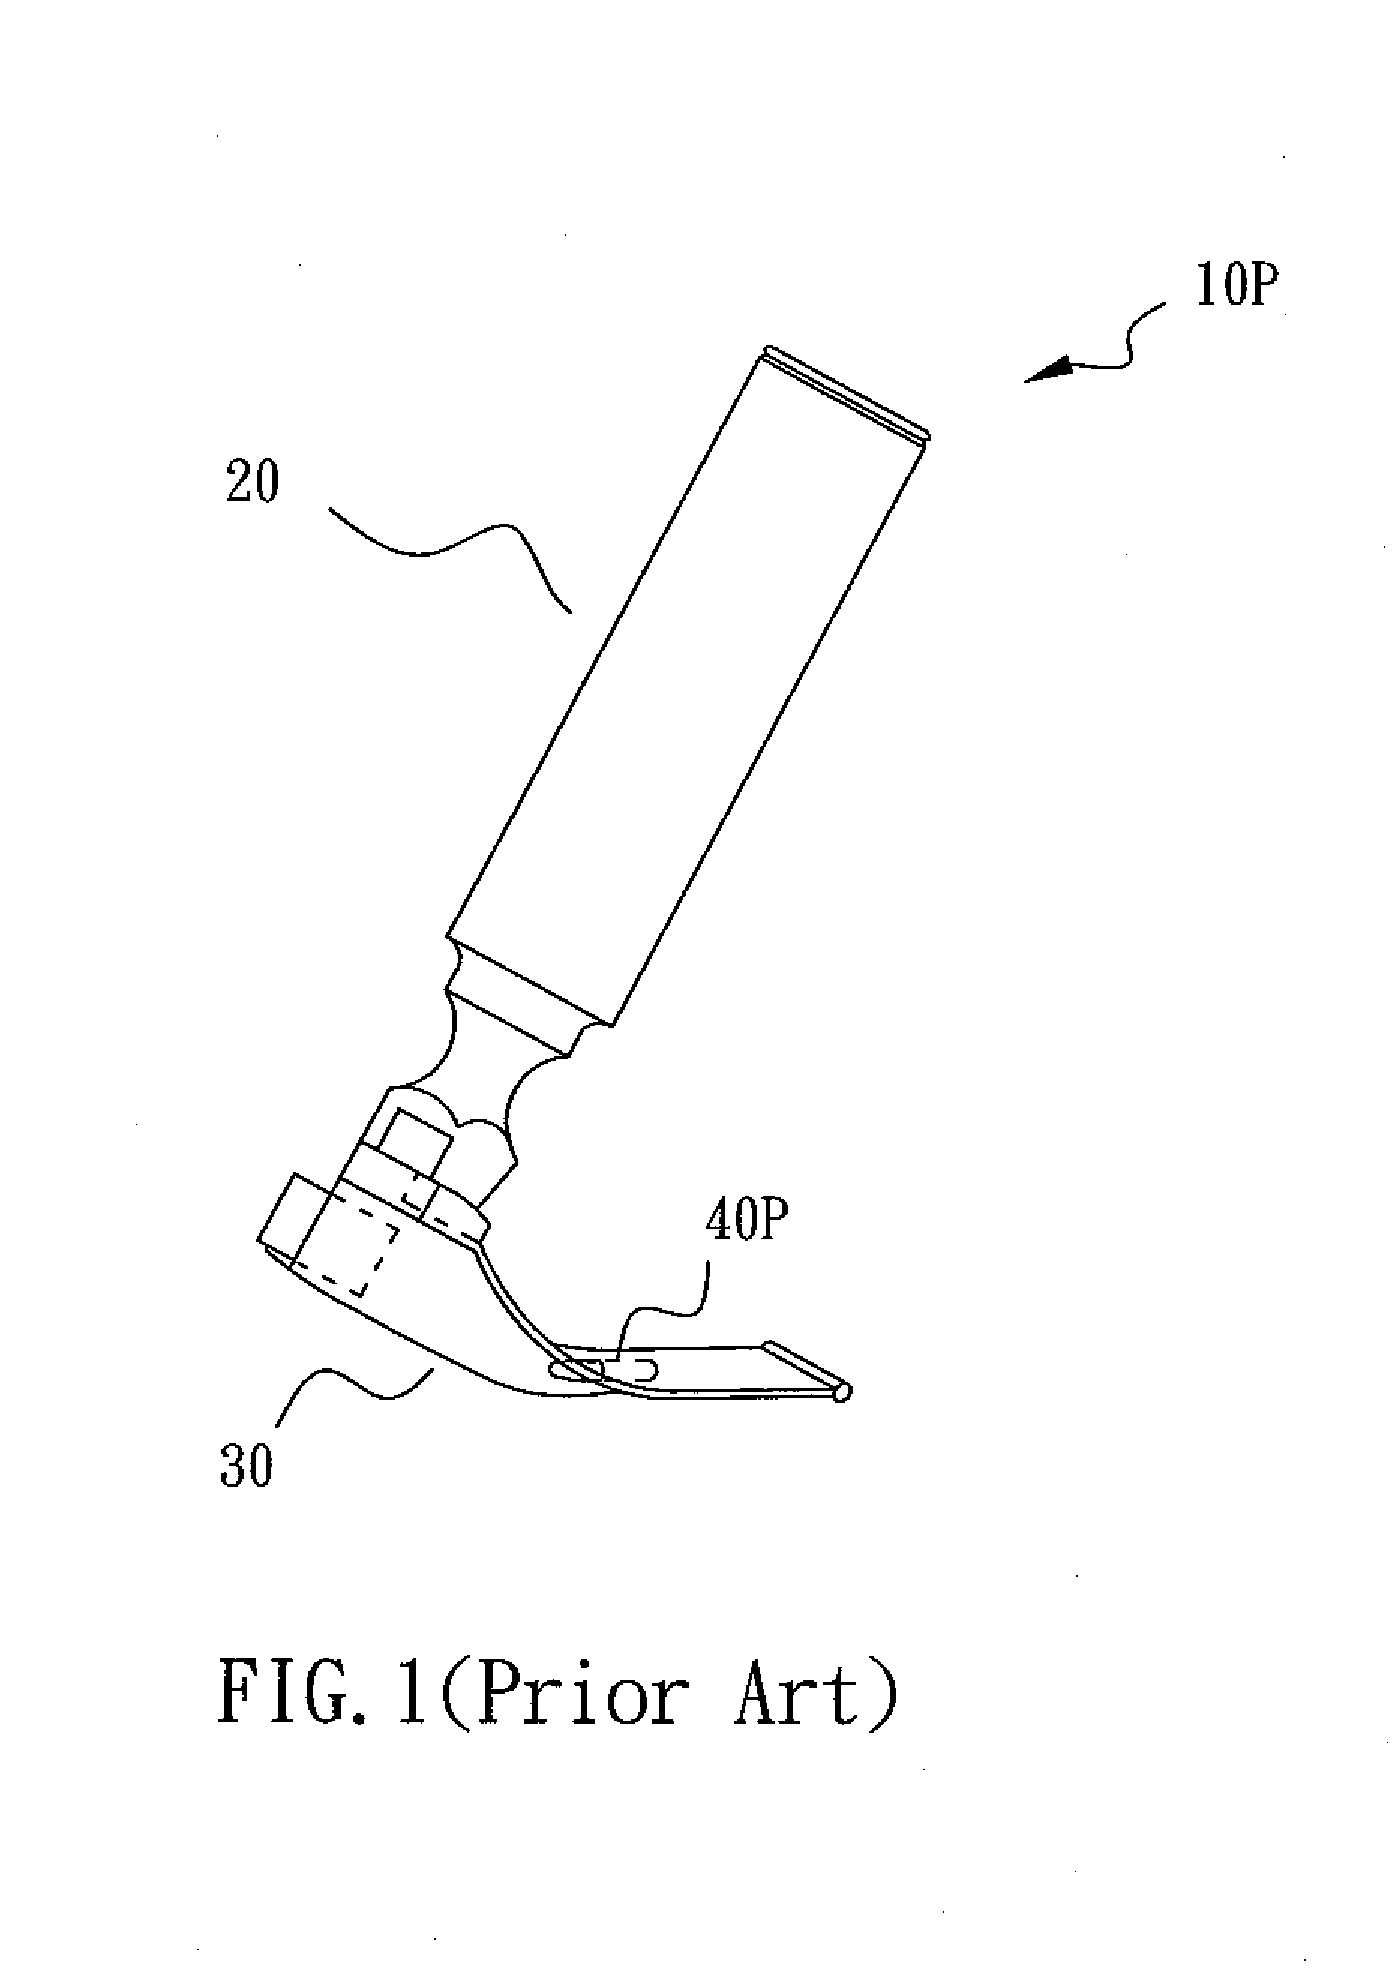 Laryngoscope with a Movable Image-Capturing Unit